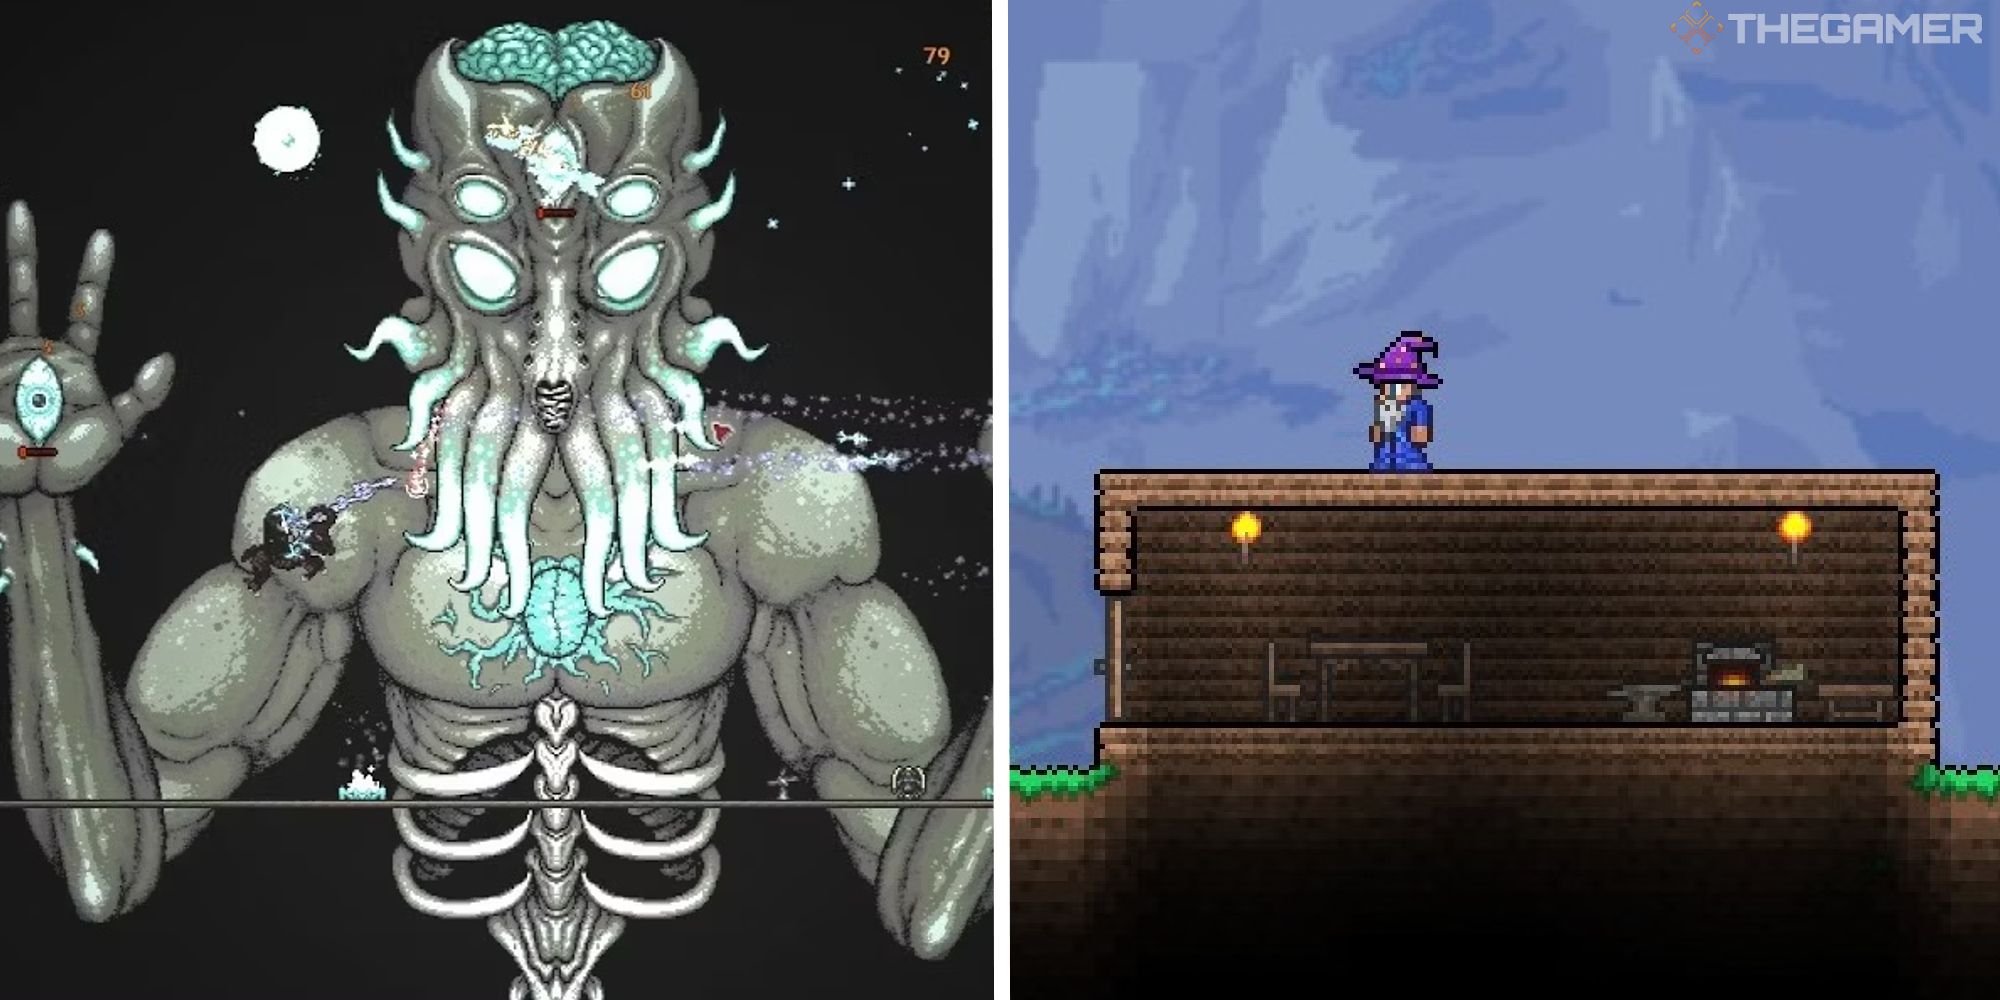 split image showing moon lord next to image of starter house